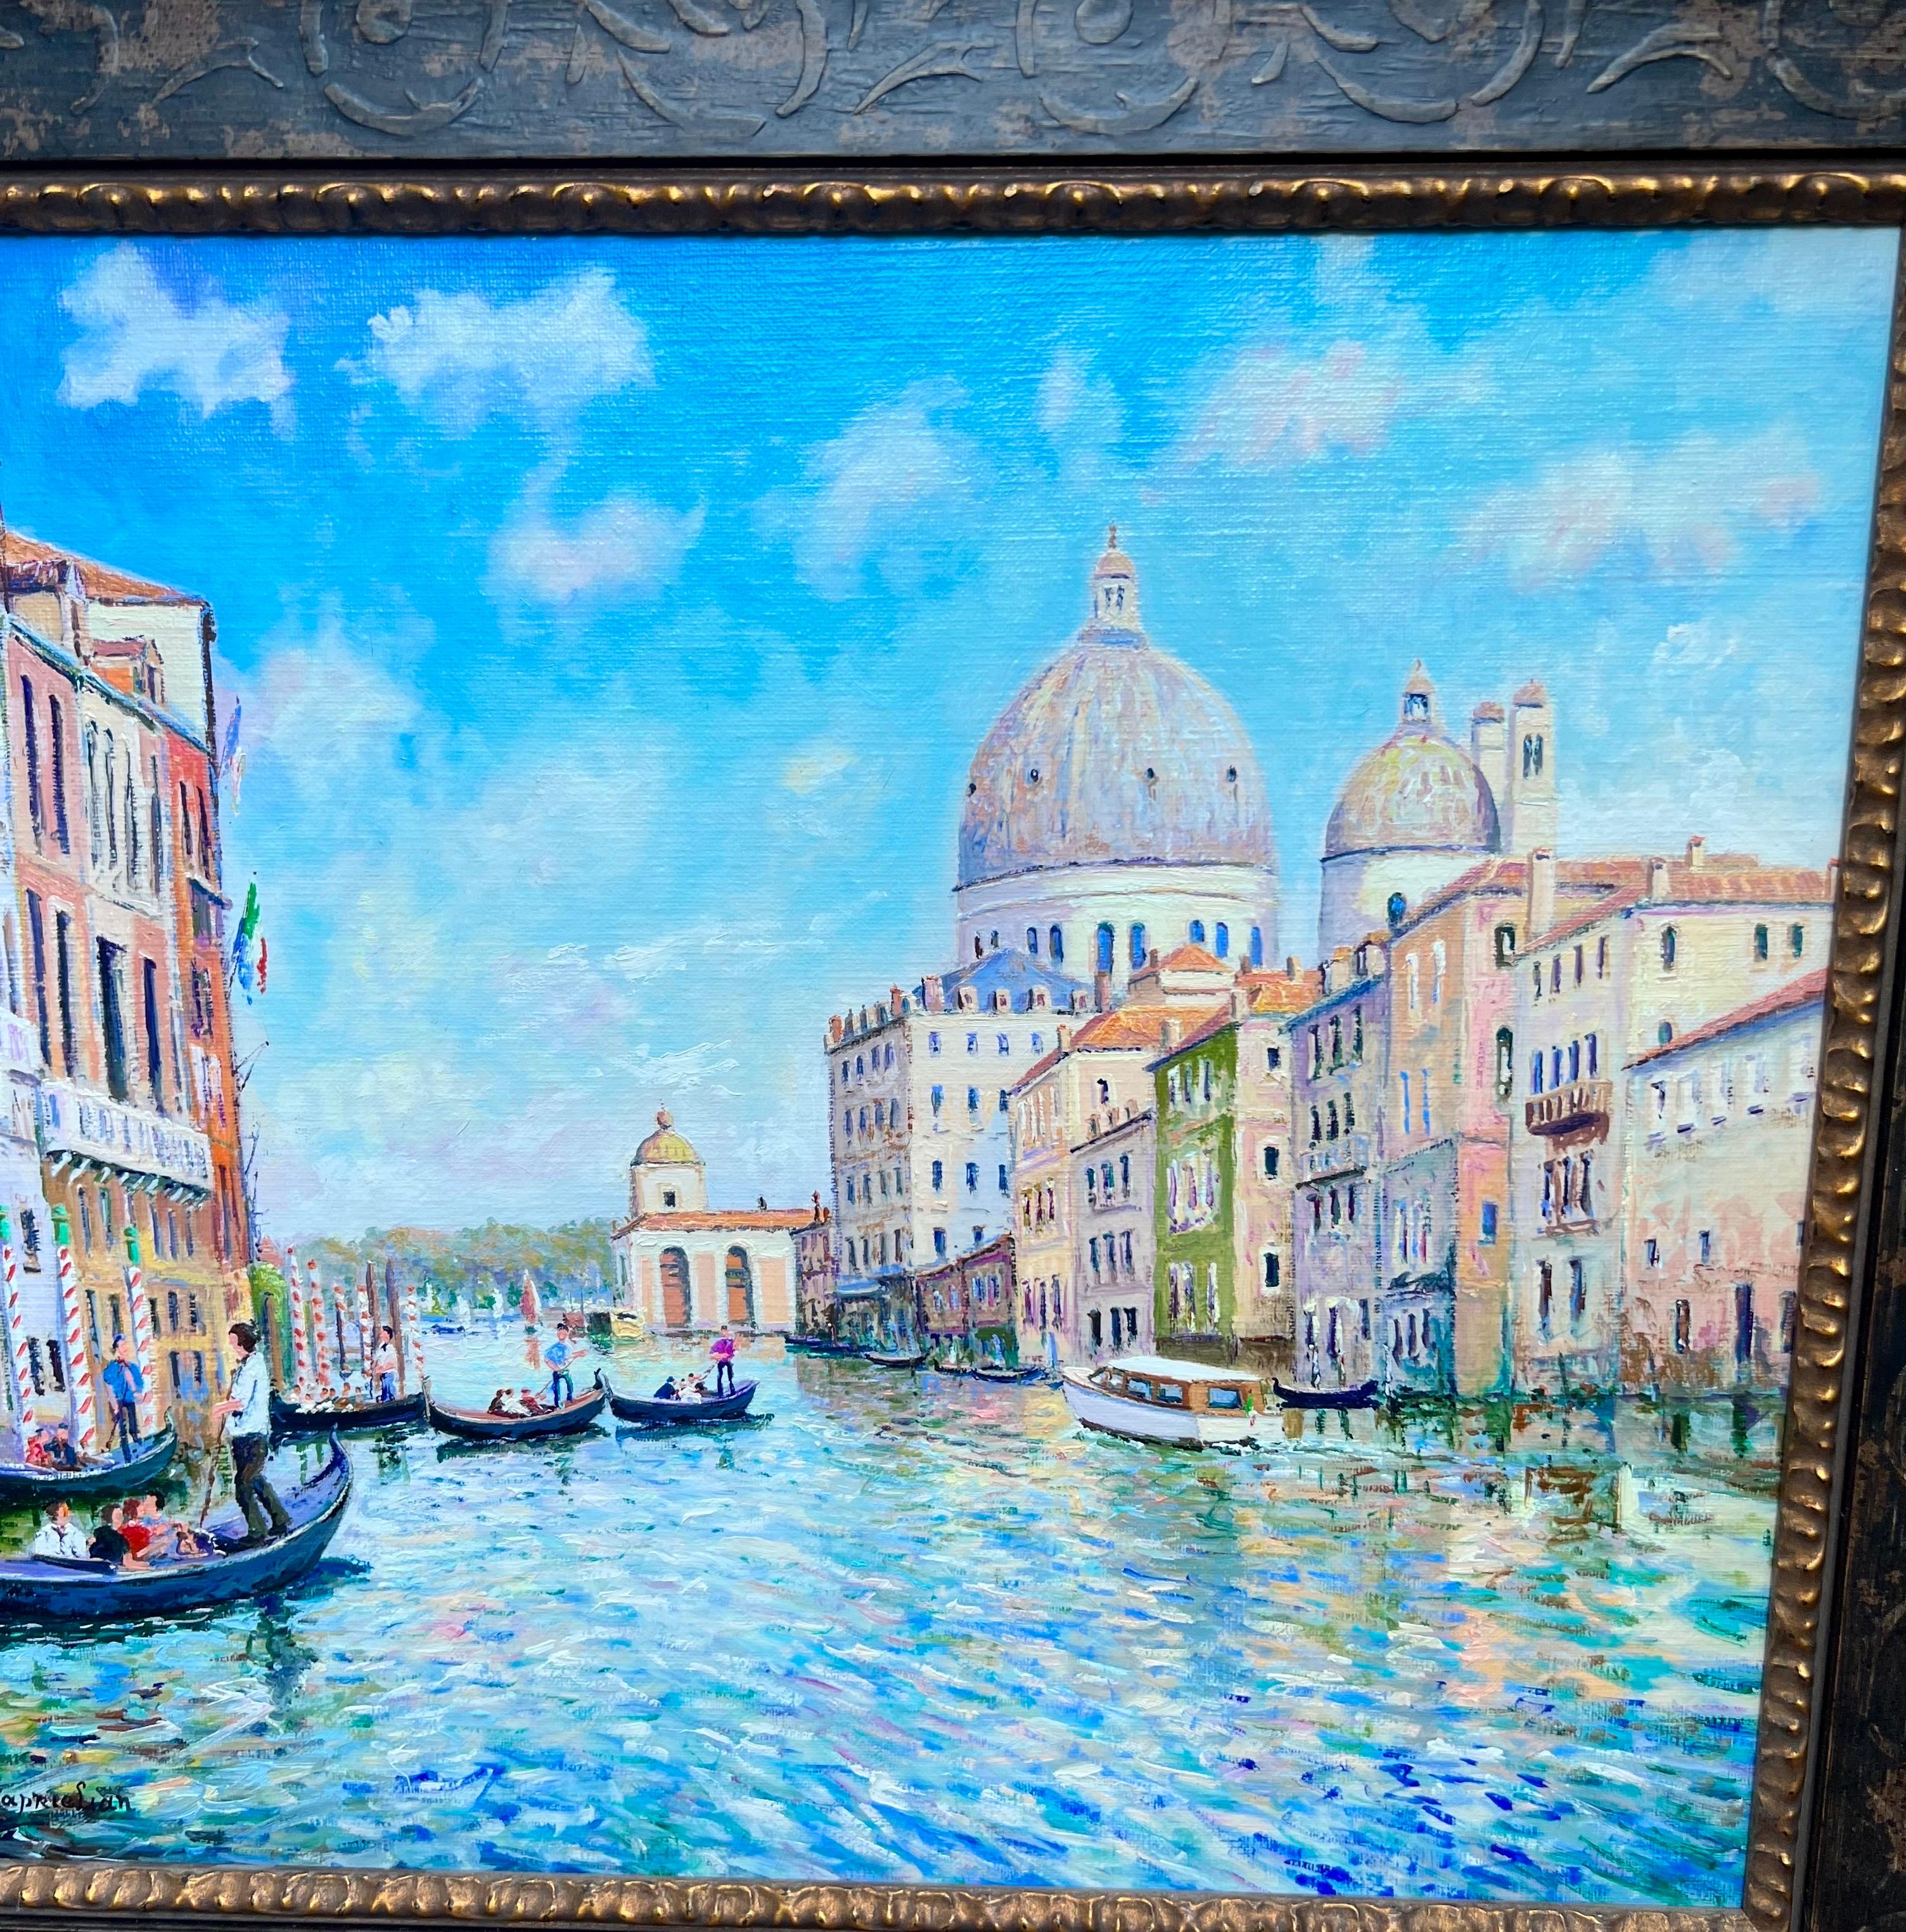 Signed lower left and titled back of canvas. Oil painting on canvas and framed. 
Venice canal scene. 